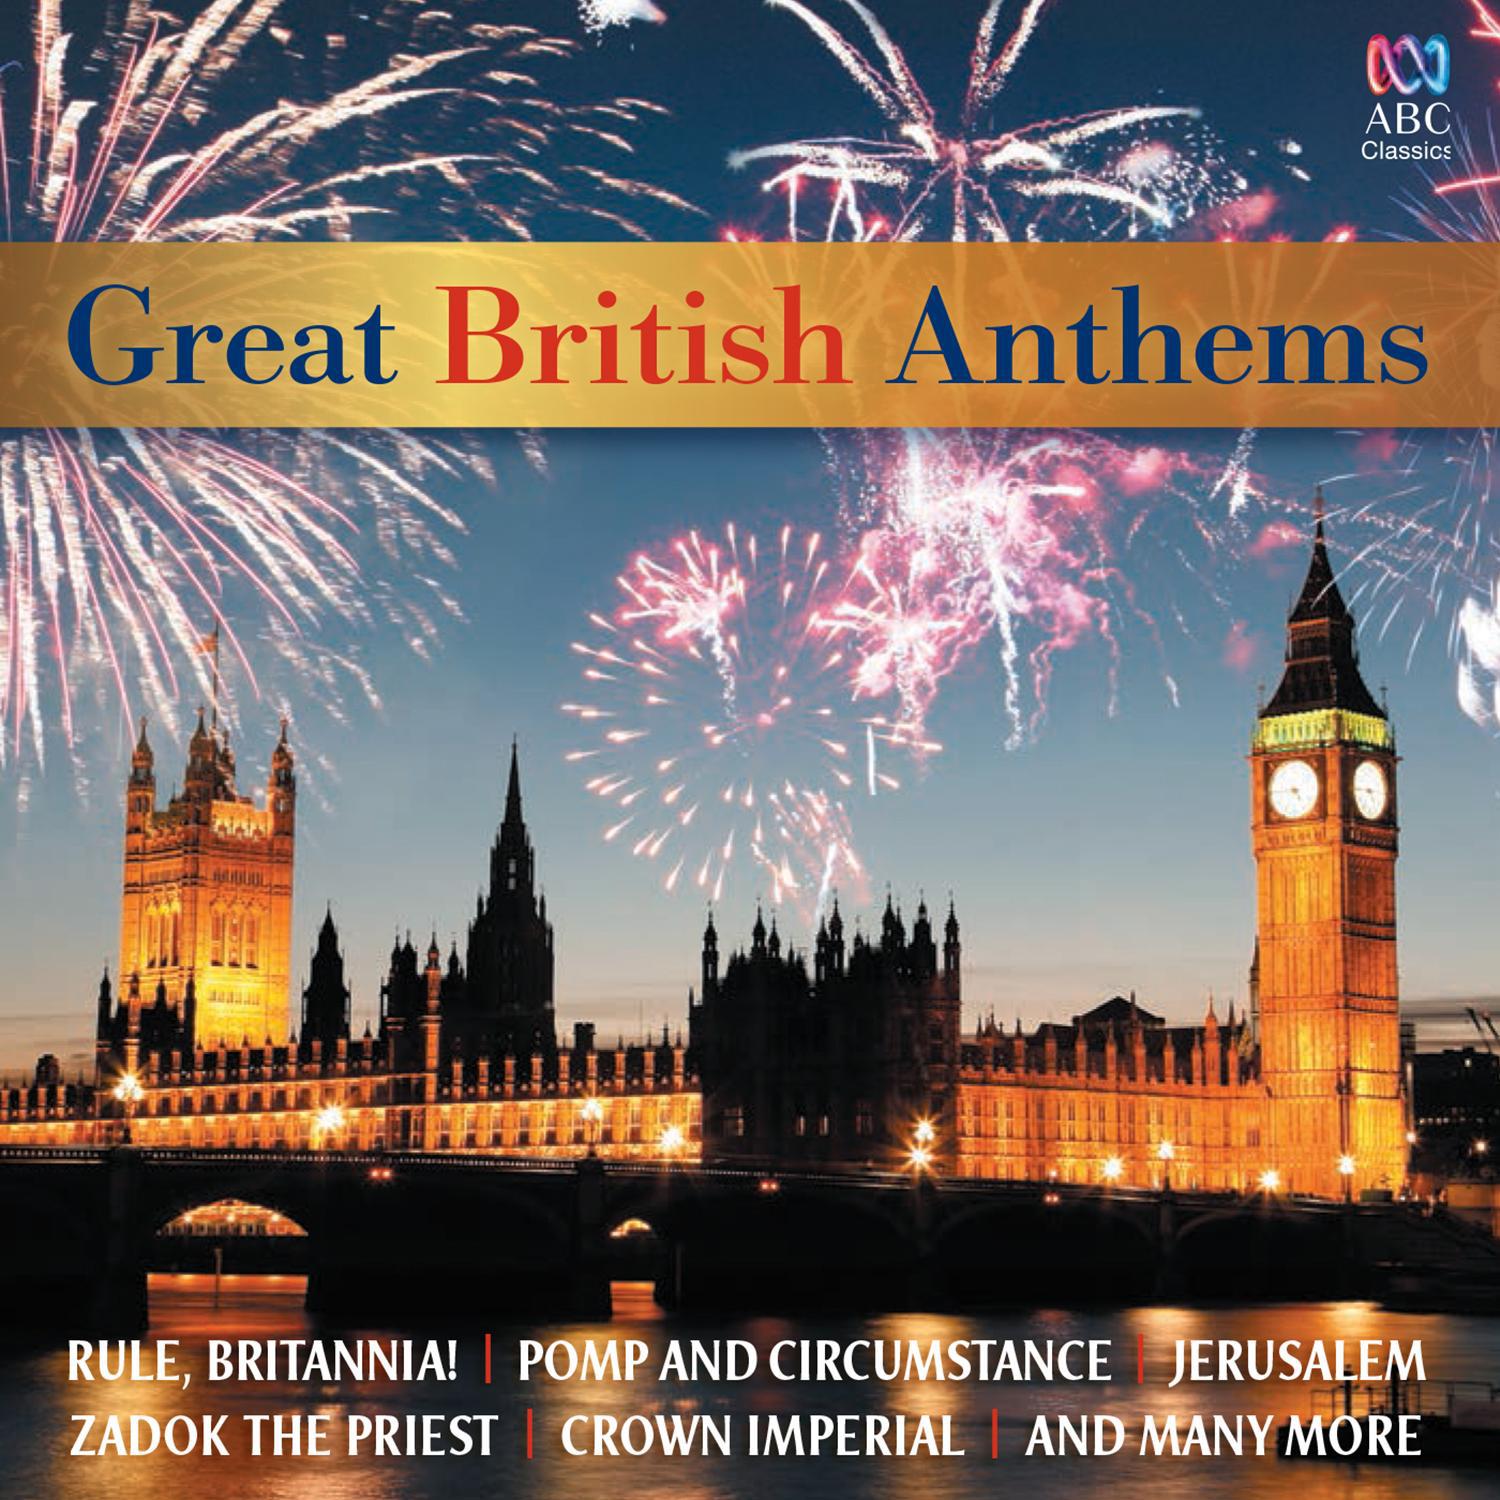 Pomp and Circumstance March in D Major, Op. 39:No. 1 "Land of Hope and Glory"